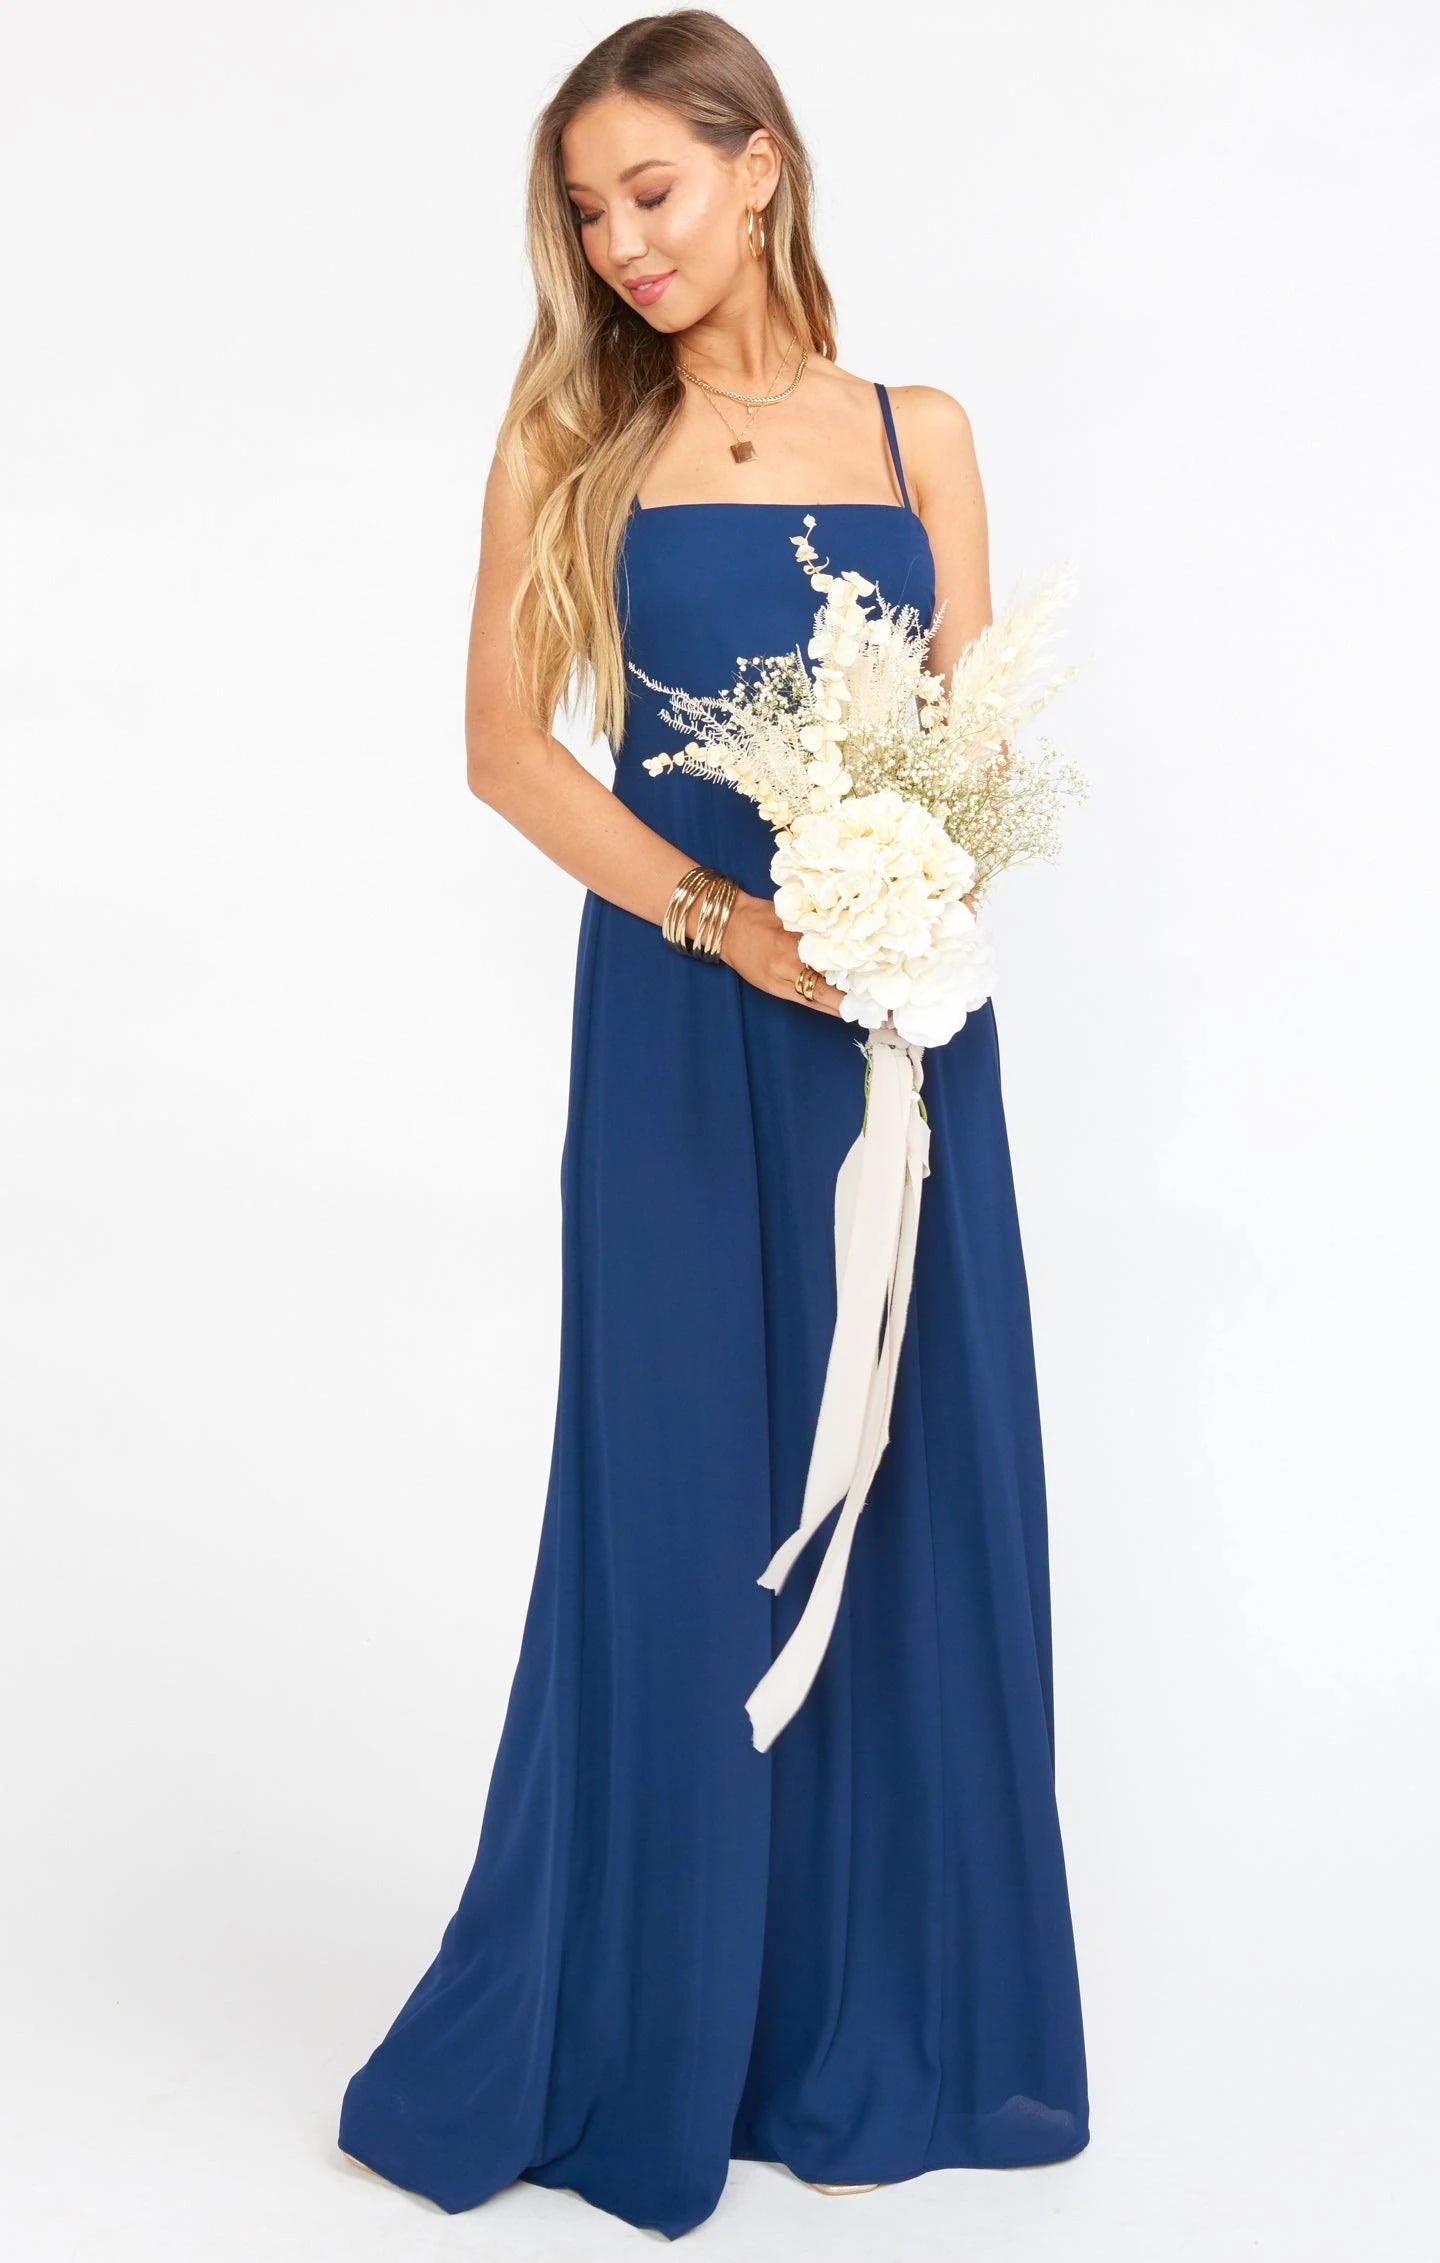 Chic Navy Blue Maxi Dress with Tie Back | Image